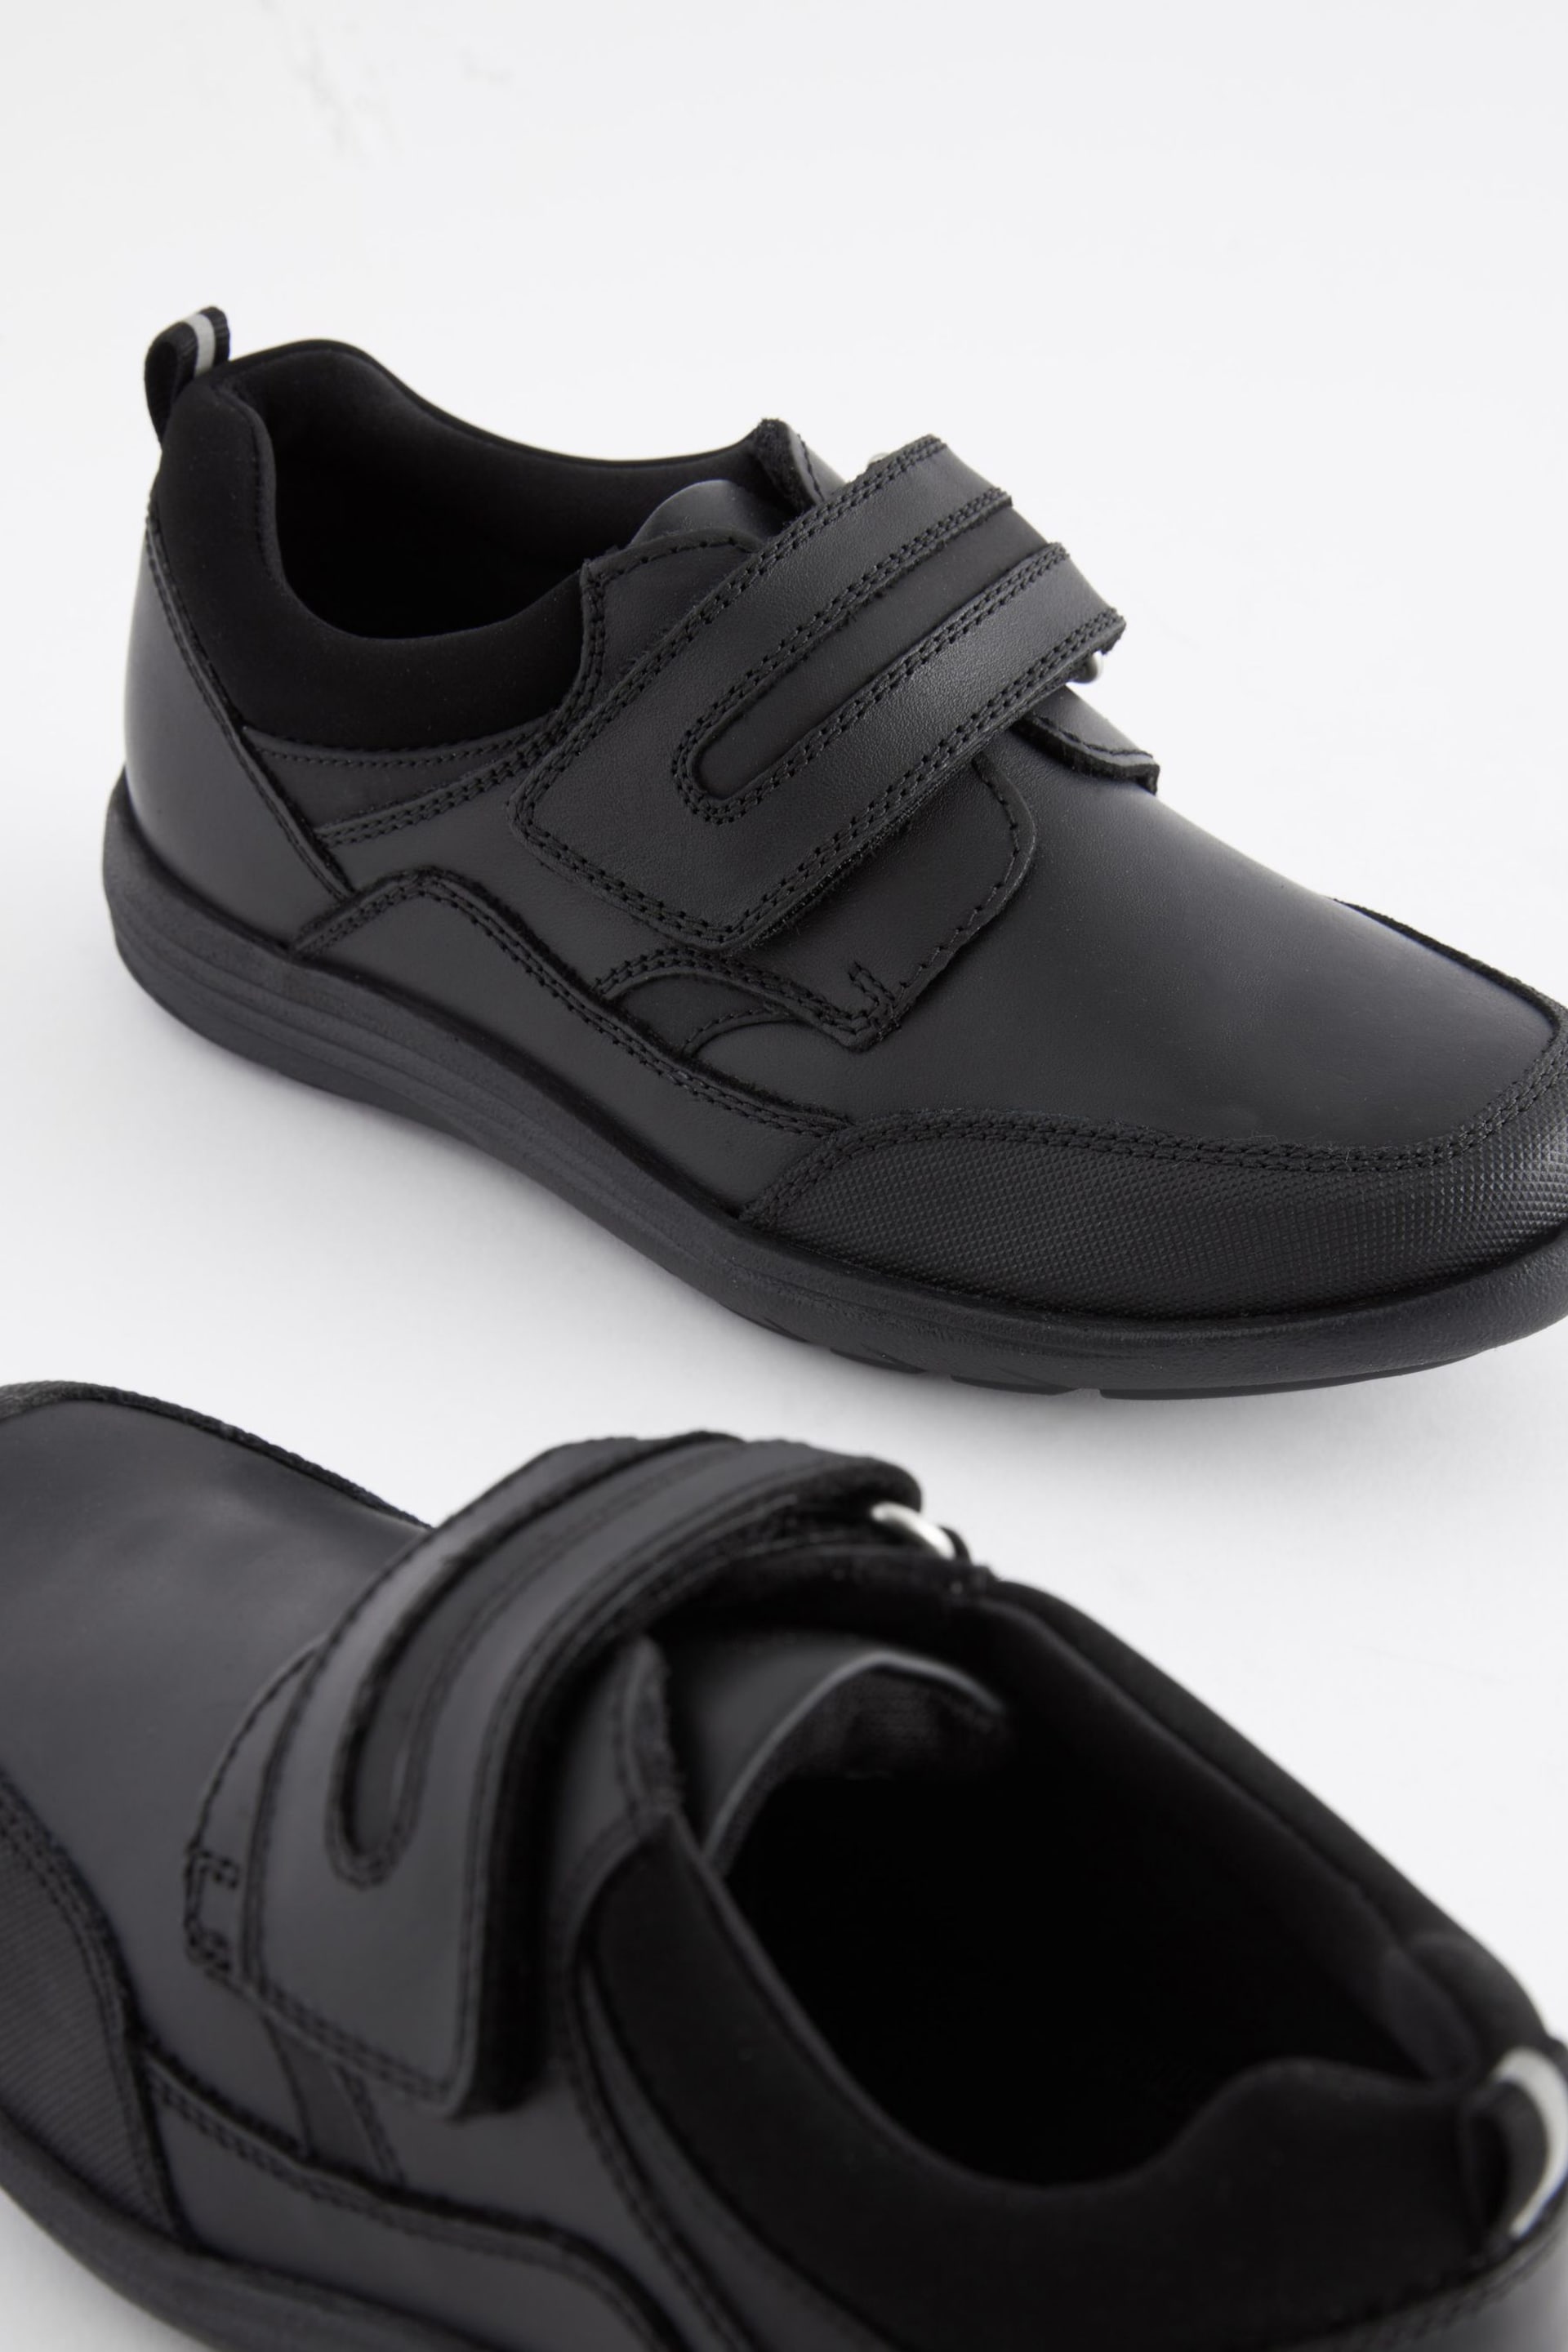 Black Narrow Fit (E) School Leather Single Strap Shoes - Image 4 of 6